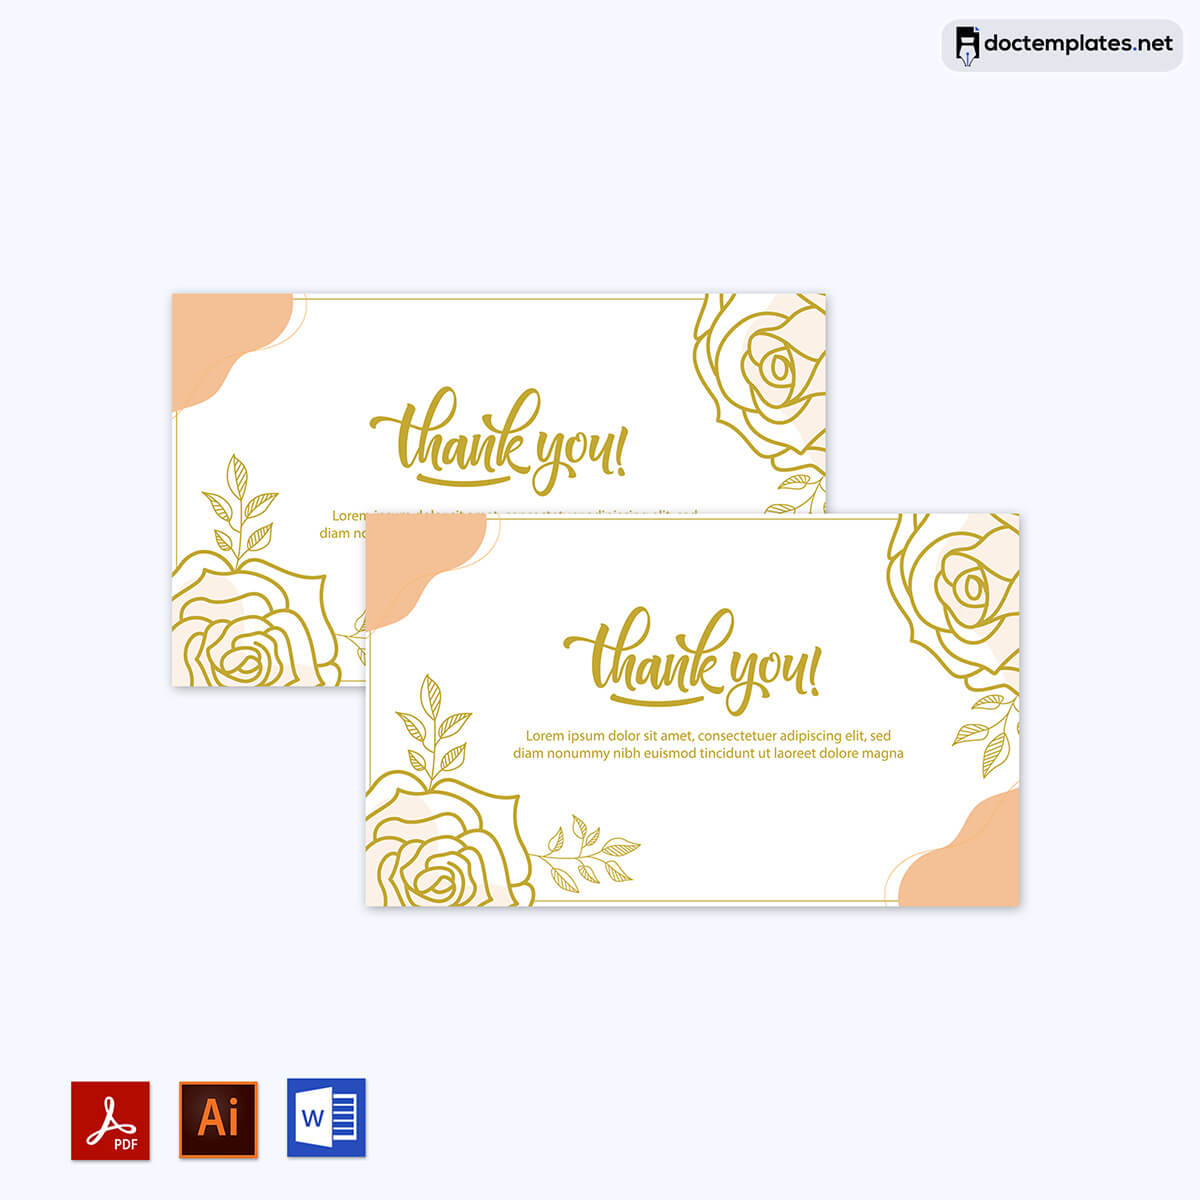 Image of Thank you cards (free)
Thank you cards (free)
